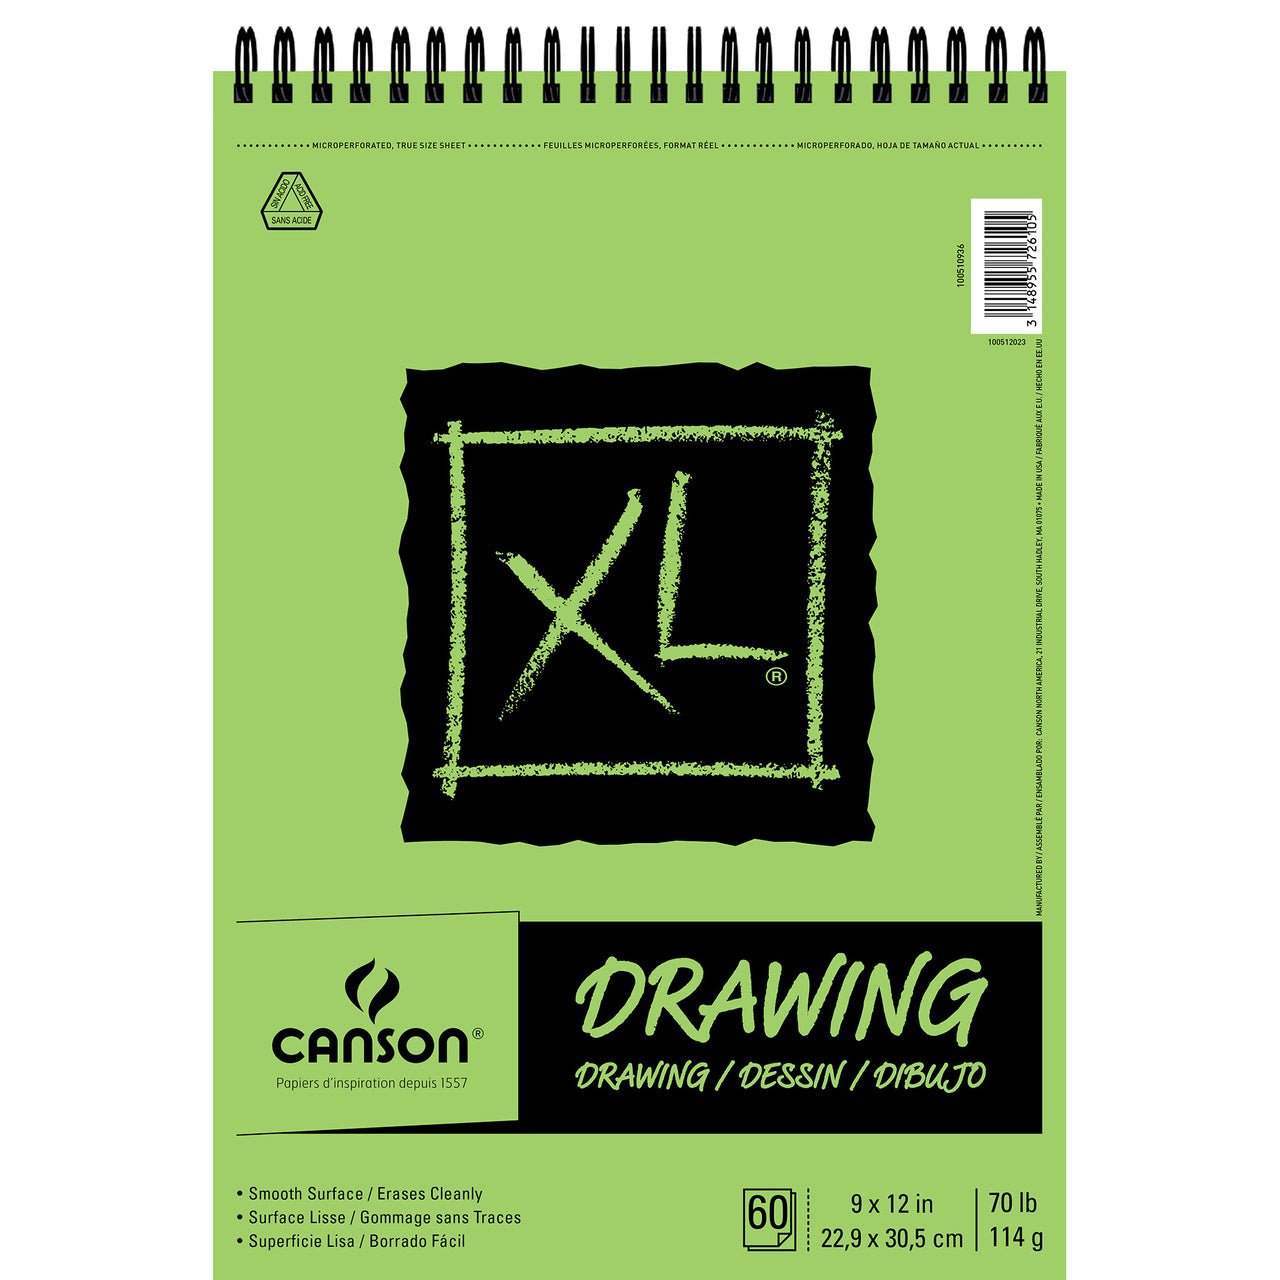 Canson XL Drawing Pad - Top Wire Bound 9x12 inch - 60 Sheets - merriartist.com